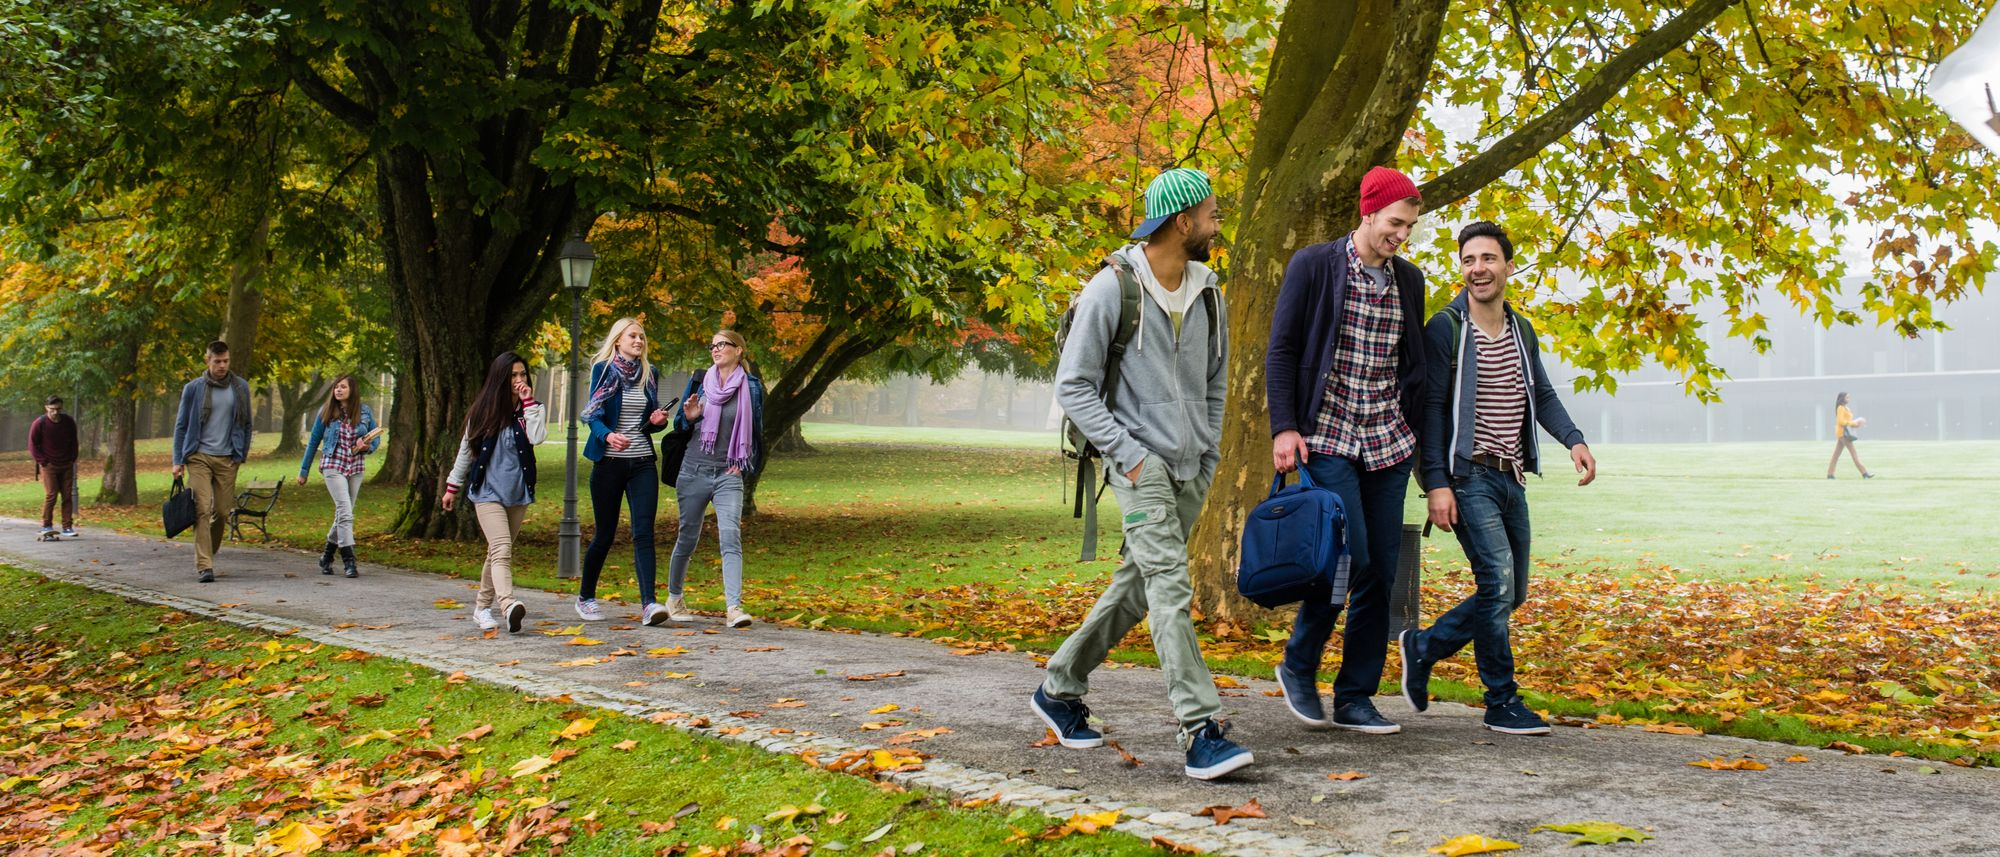 Students at a Pittsburgh university walking to class on a fall day